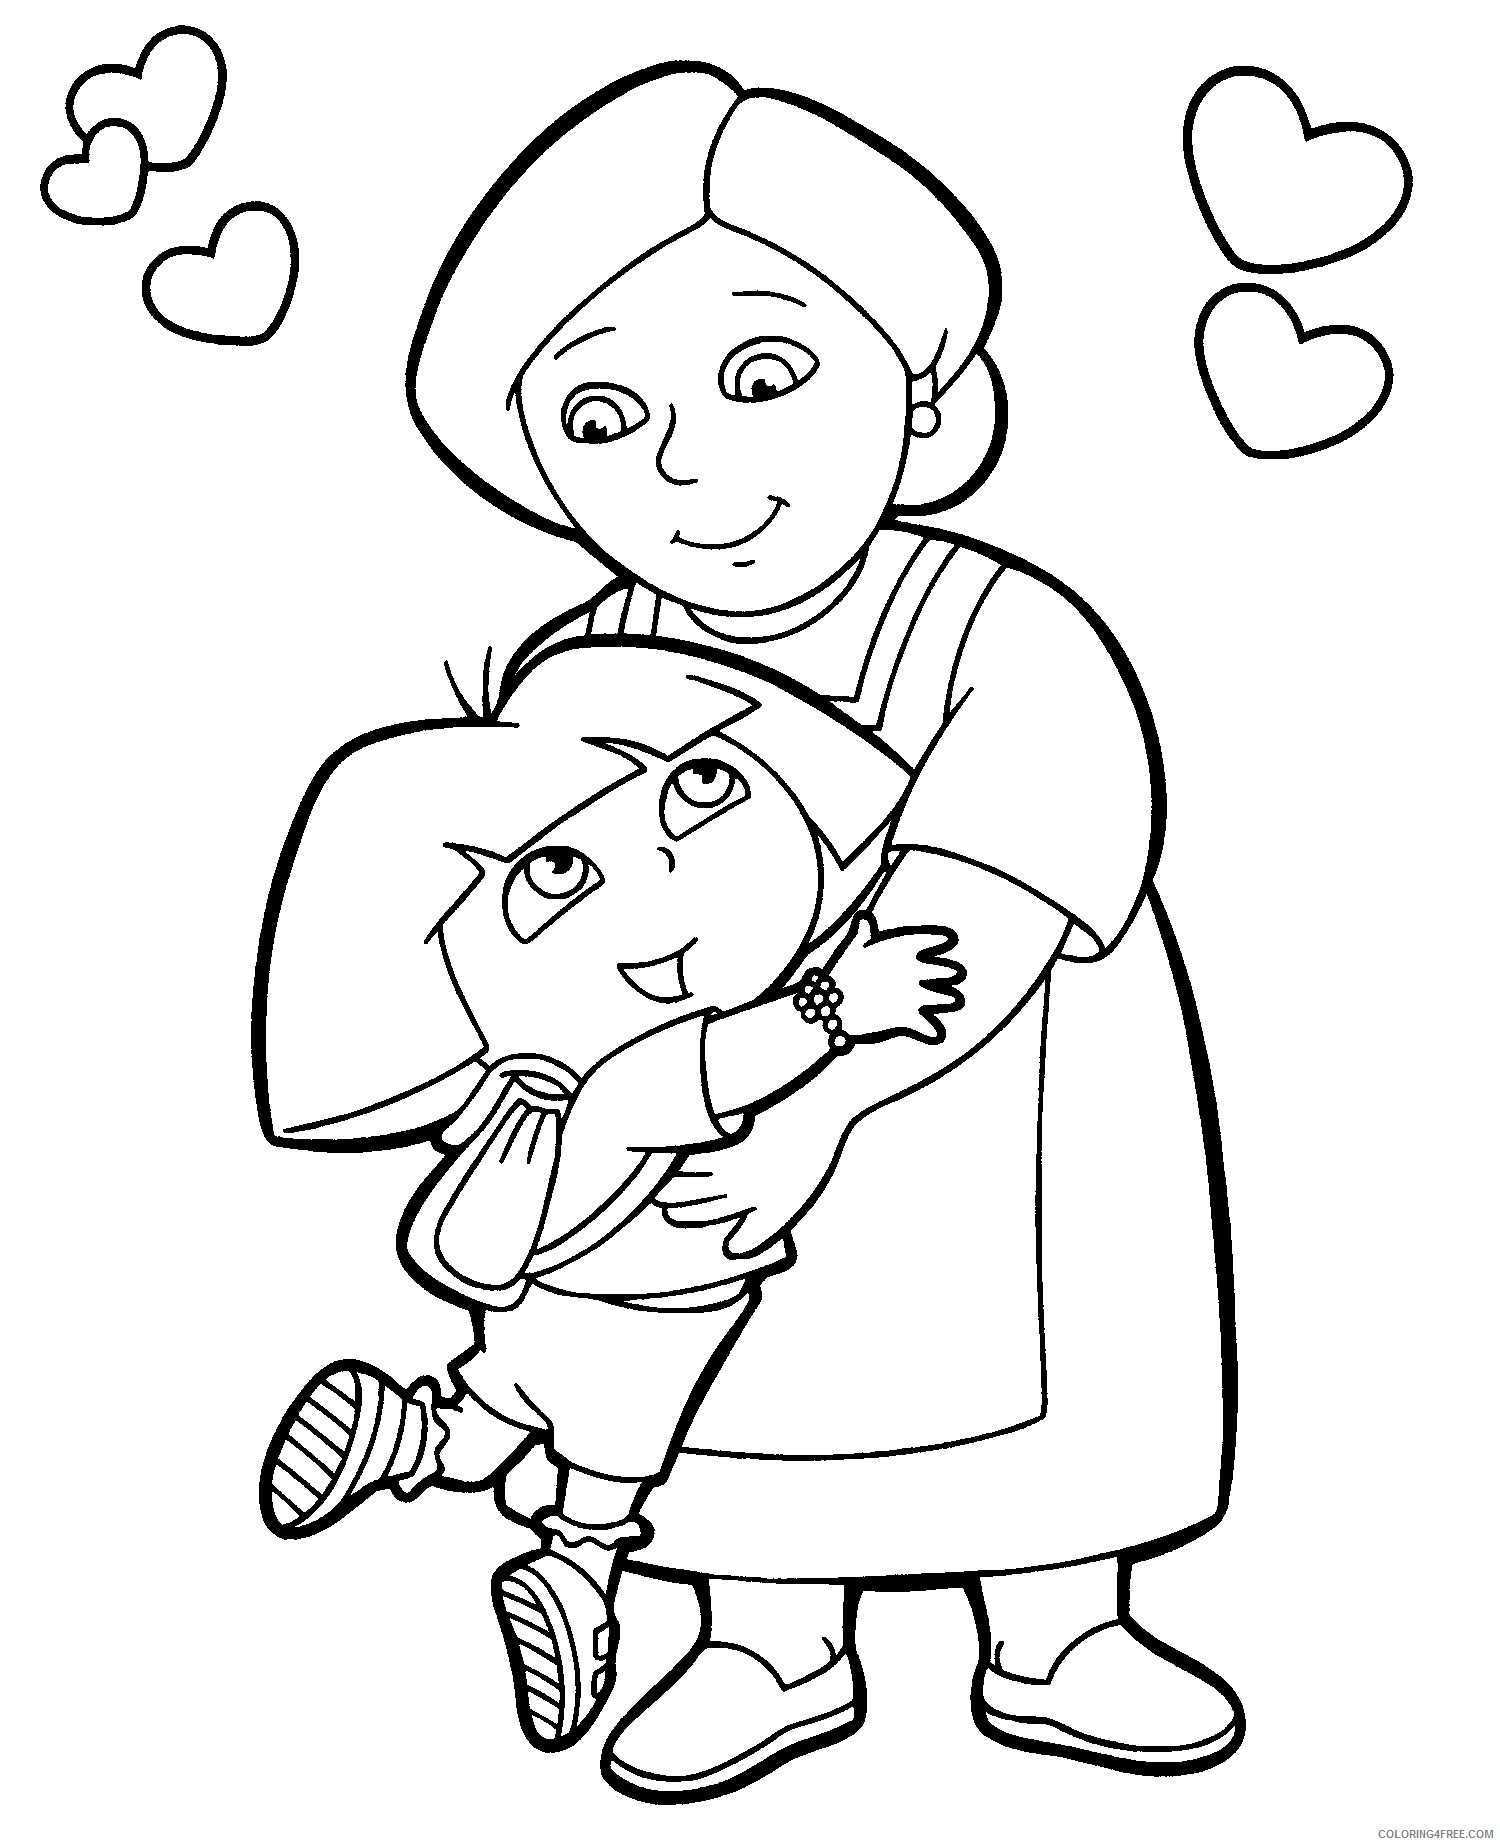 dora coloring pages doras grandmother Coloring4free